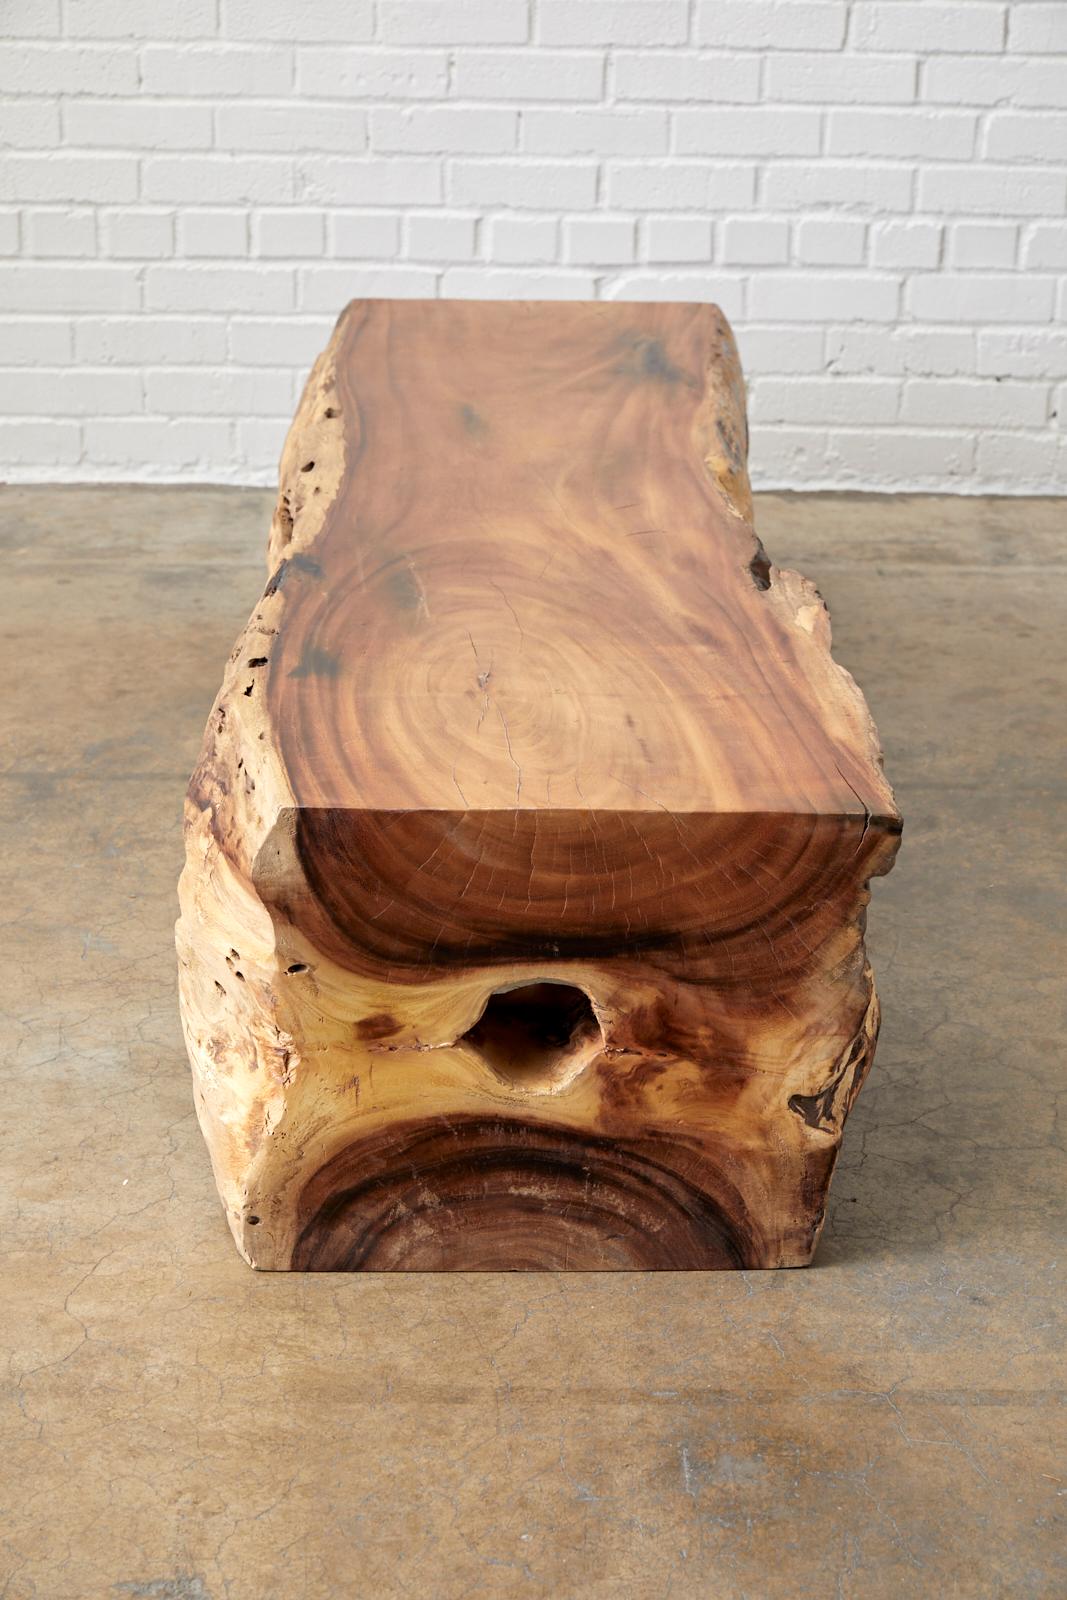 Fantastic organic modern live-edge teak hardwood log bench made from a massive timber. Gorgeous from any angle this bench showcases the weathered outer bark and the radiant grain patterns of the wood. Very heavy and solid from an estate in Malibu,